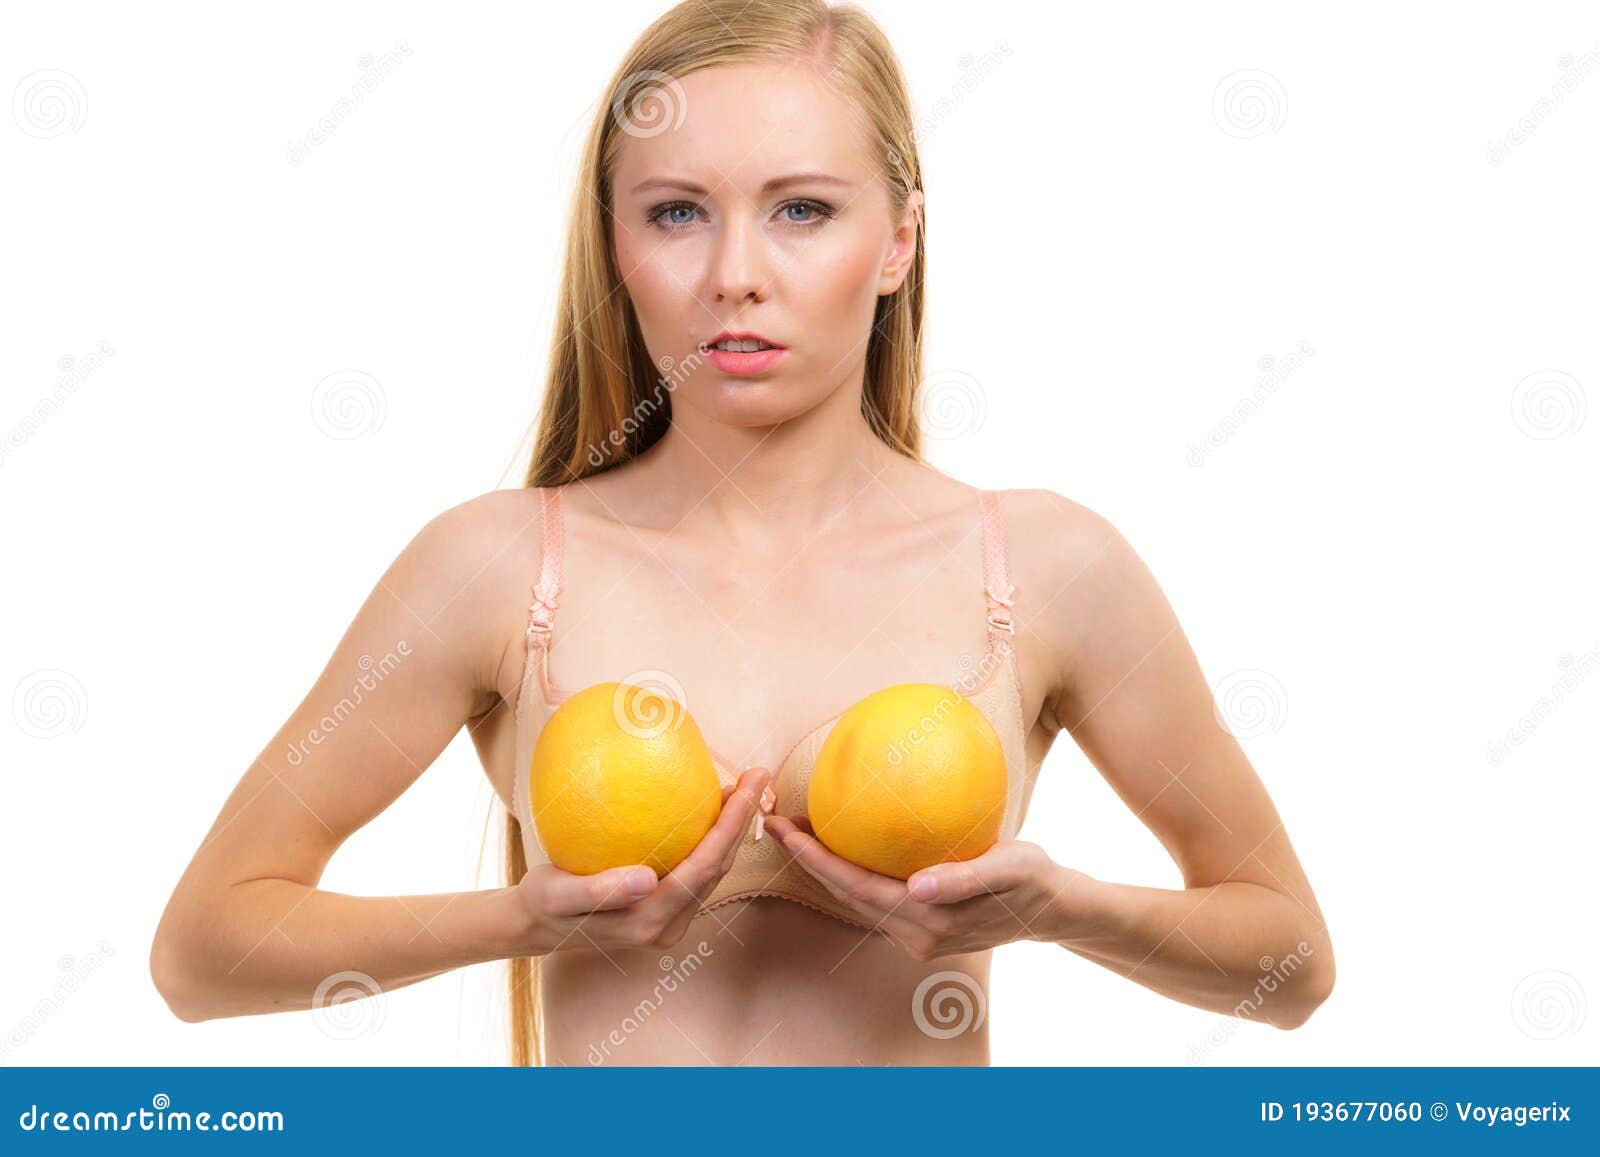 Woman Small Boobs Holds Big Orange Fruits Stock Photo - Image of small,  bigger: 193677060